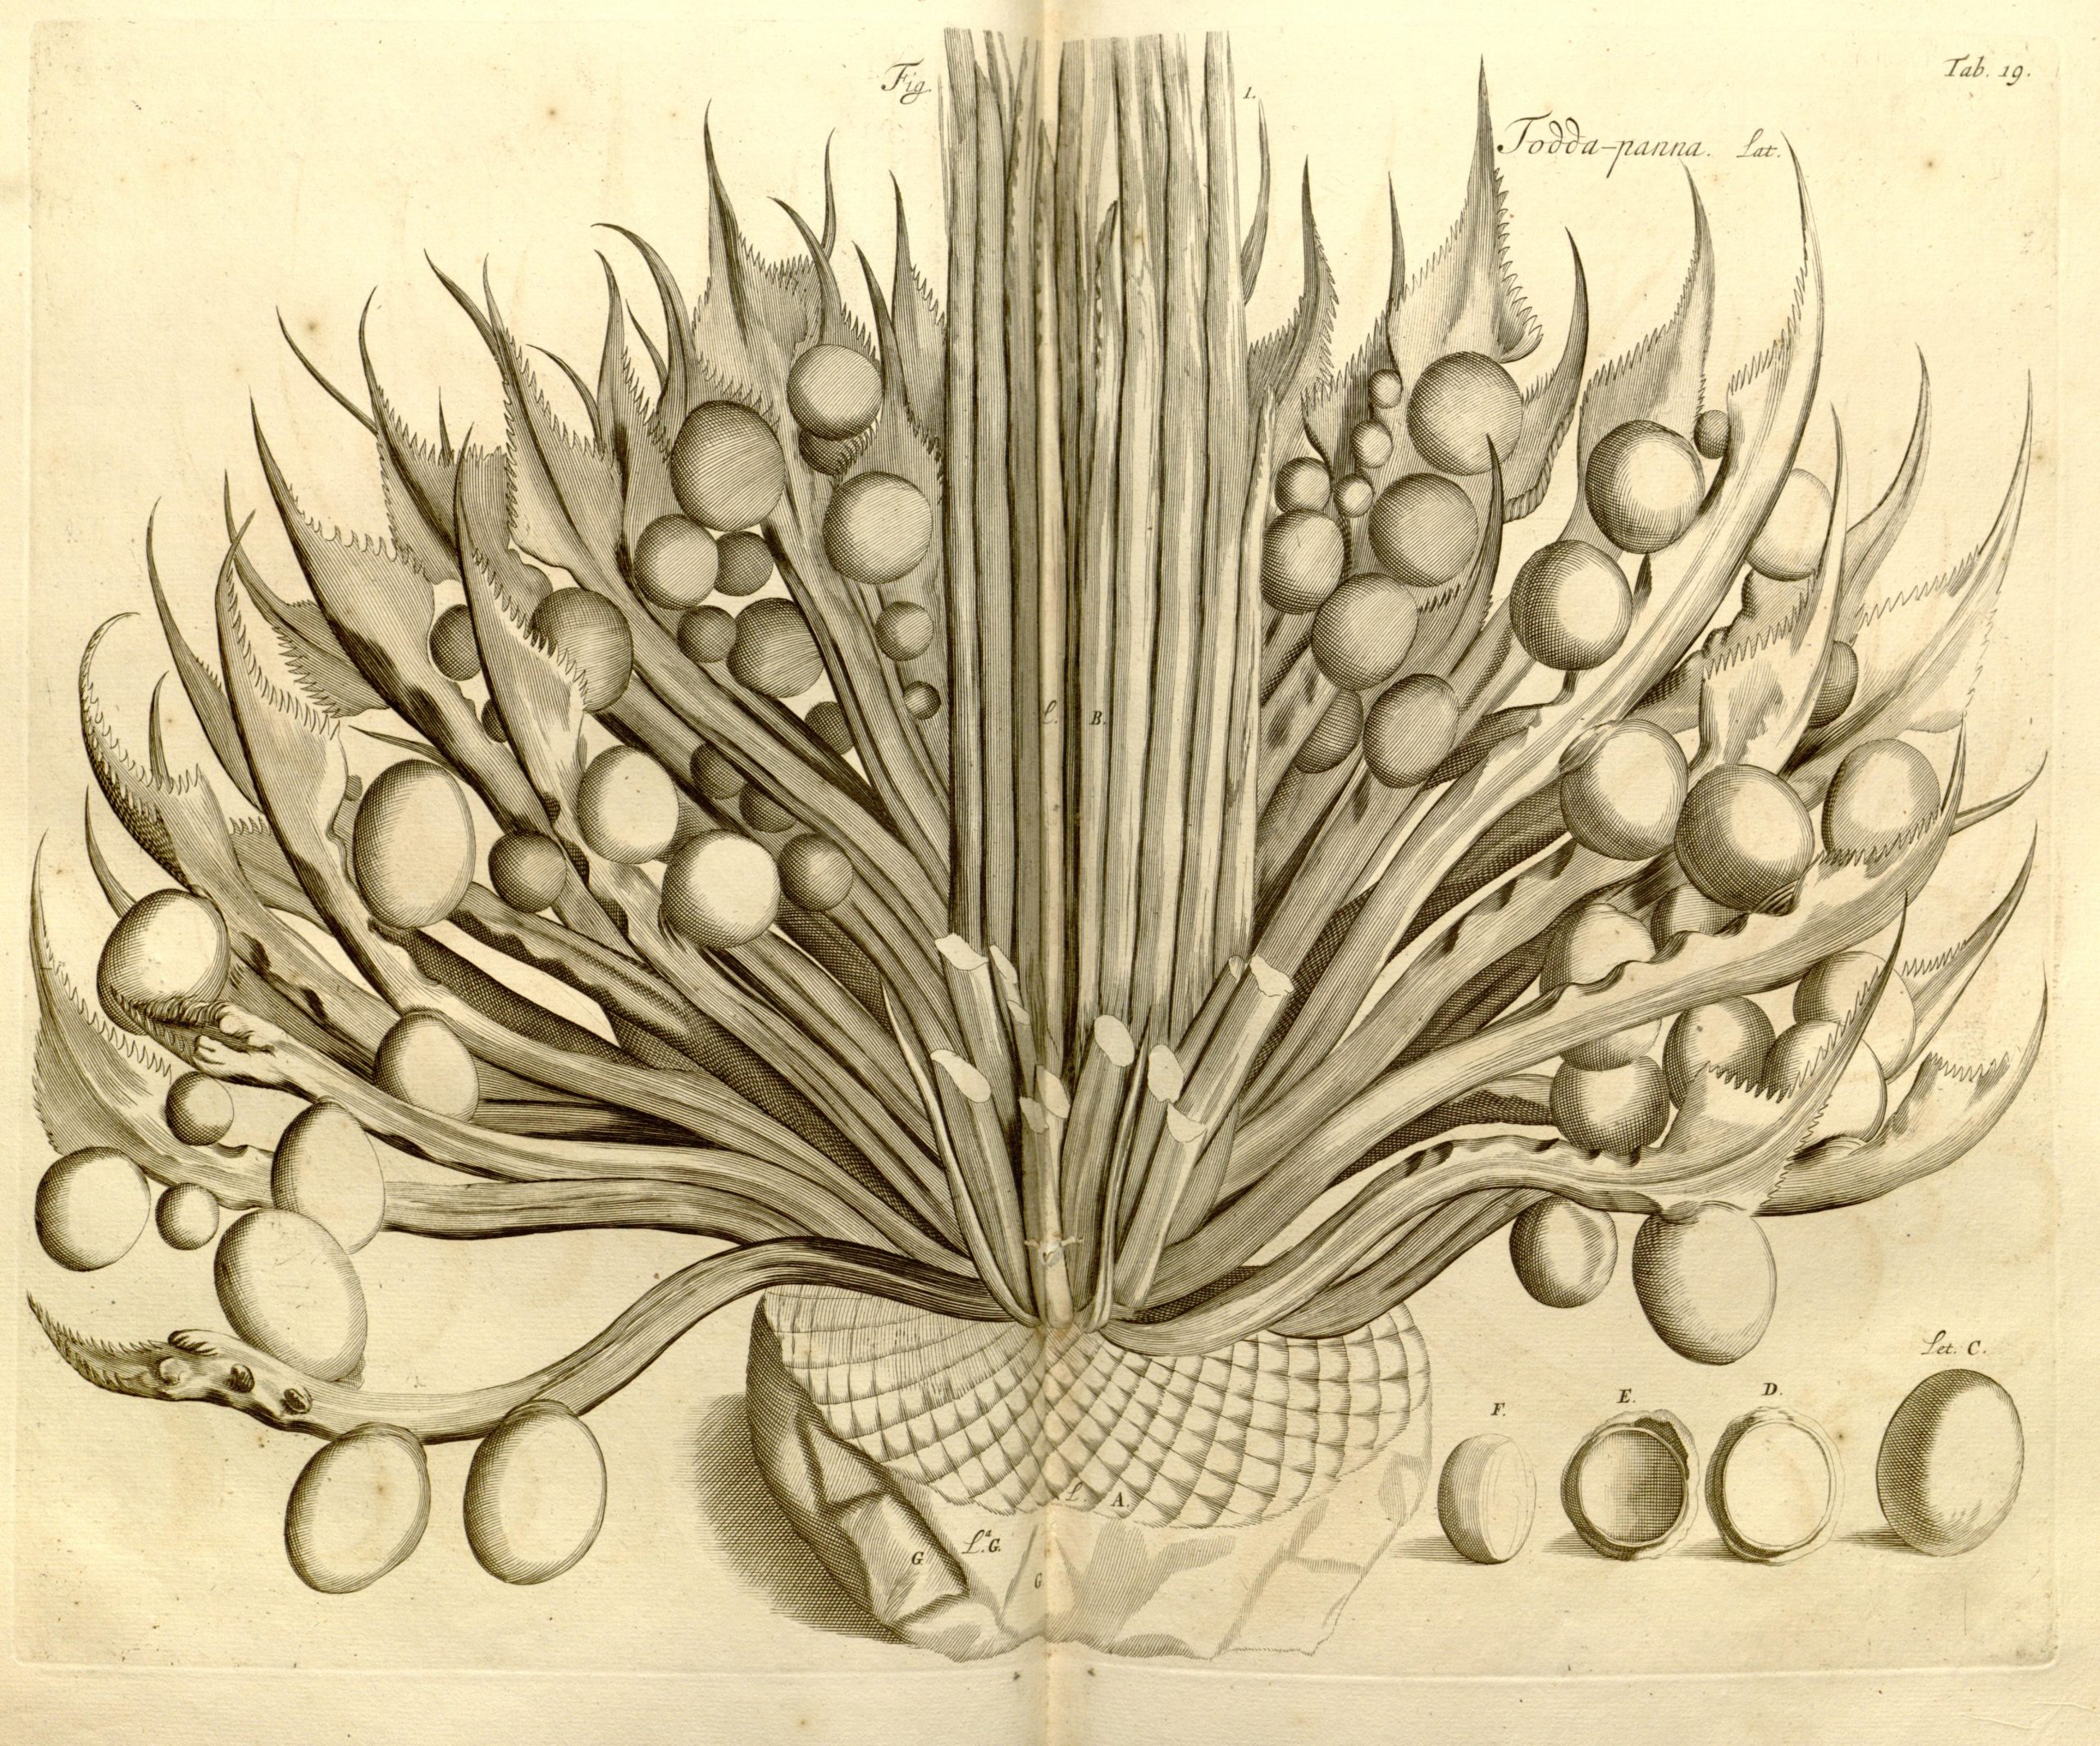 shows a detailed illustration from an old botany book of the open flower of the toda panna